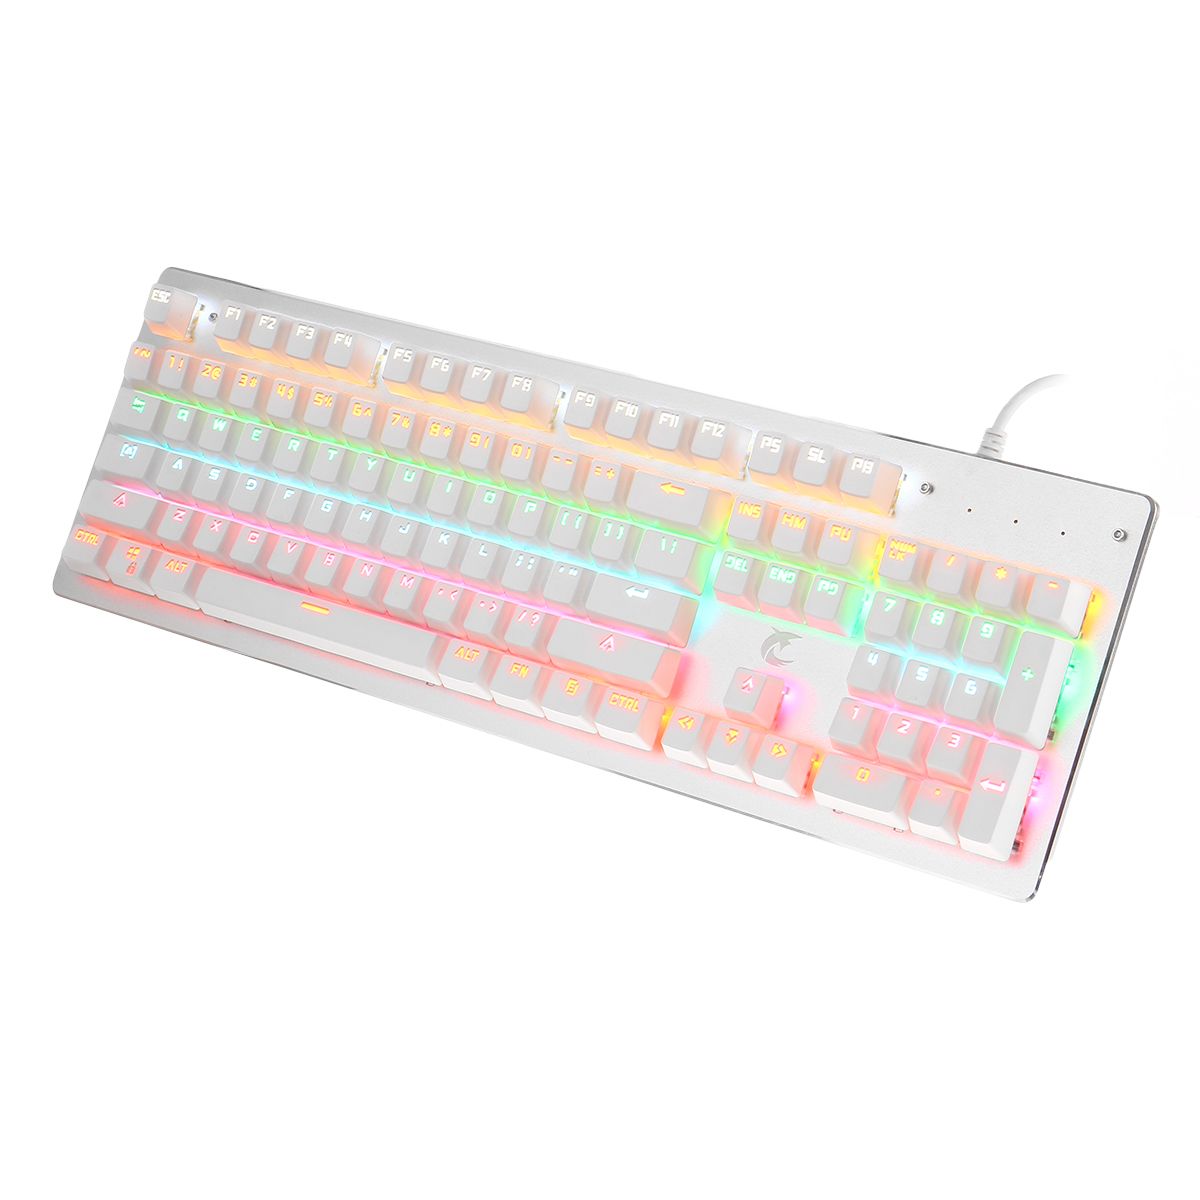 Wired-104-Keys-Mechanical-Keyboard-Aluminum-Alloy-Panel-ABS-Square-Keycap-Outemu-Blue-Switch-Gaming--1741363